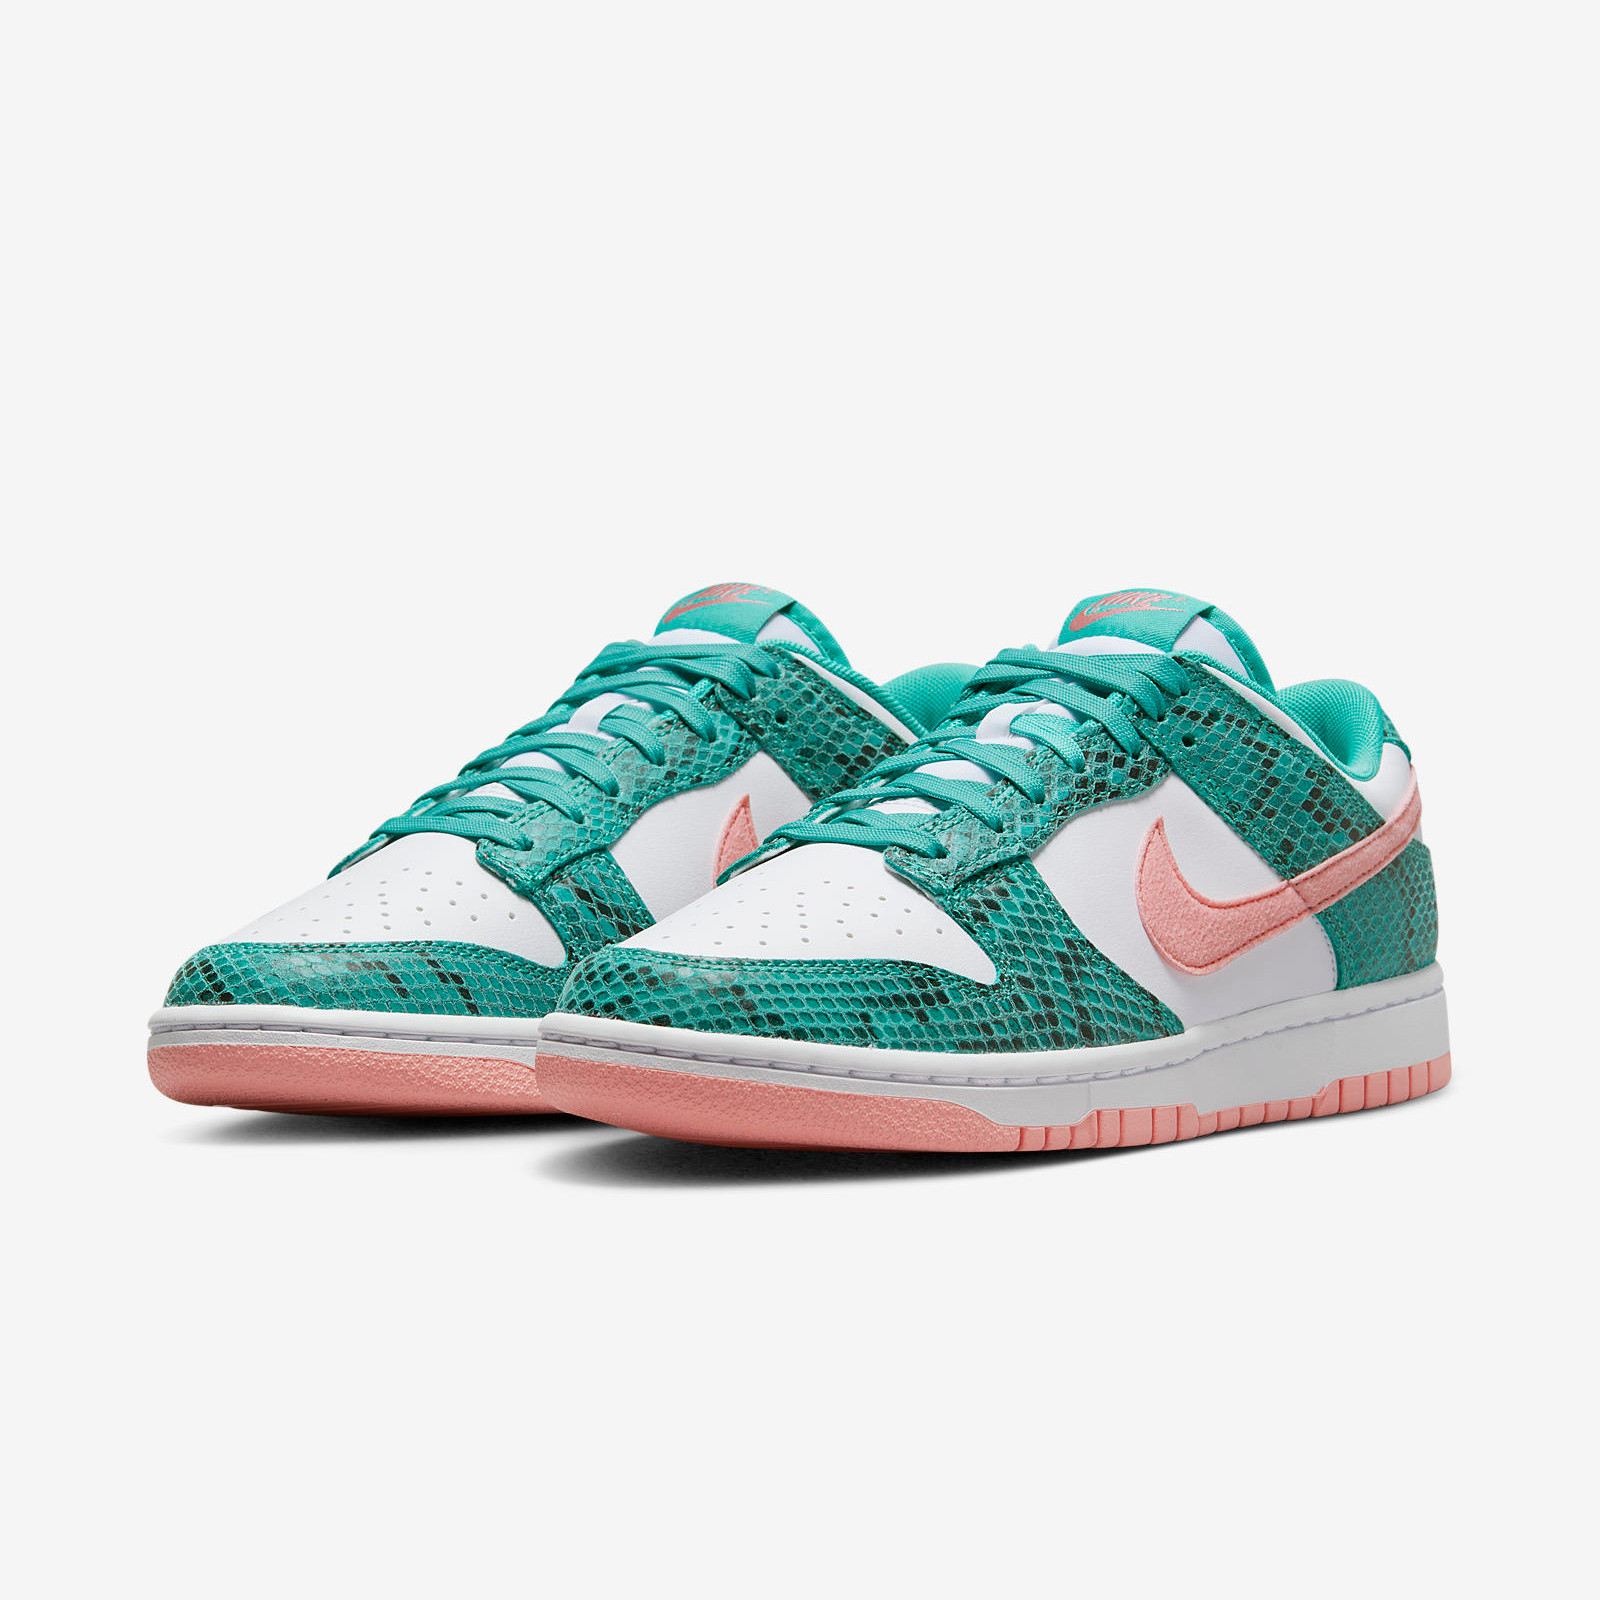 Nike Dunk Low
« Washed Teal »